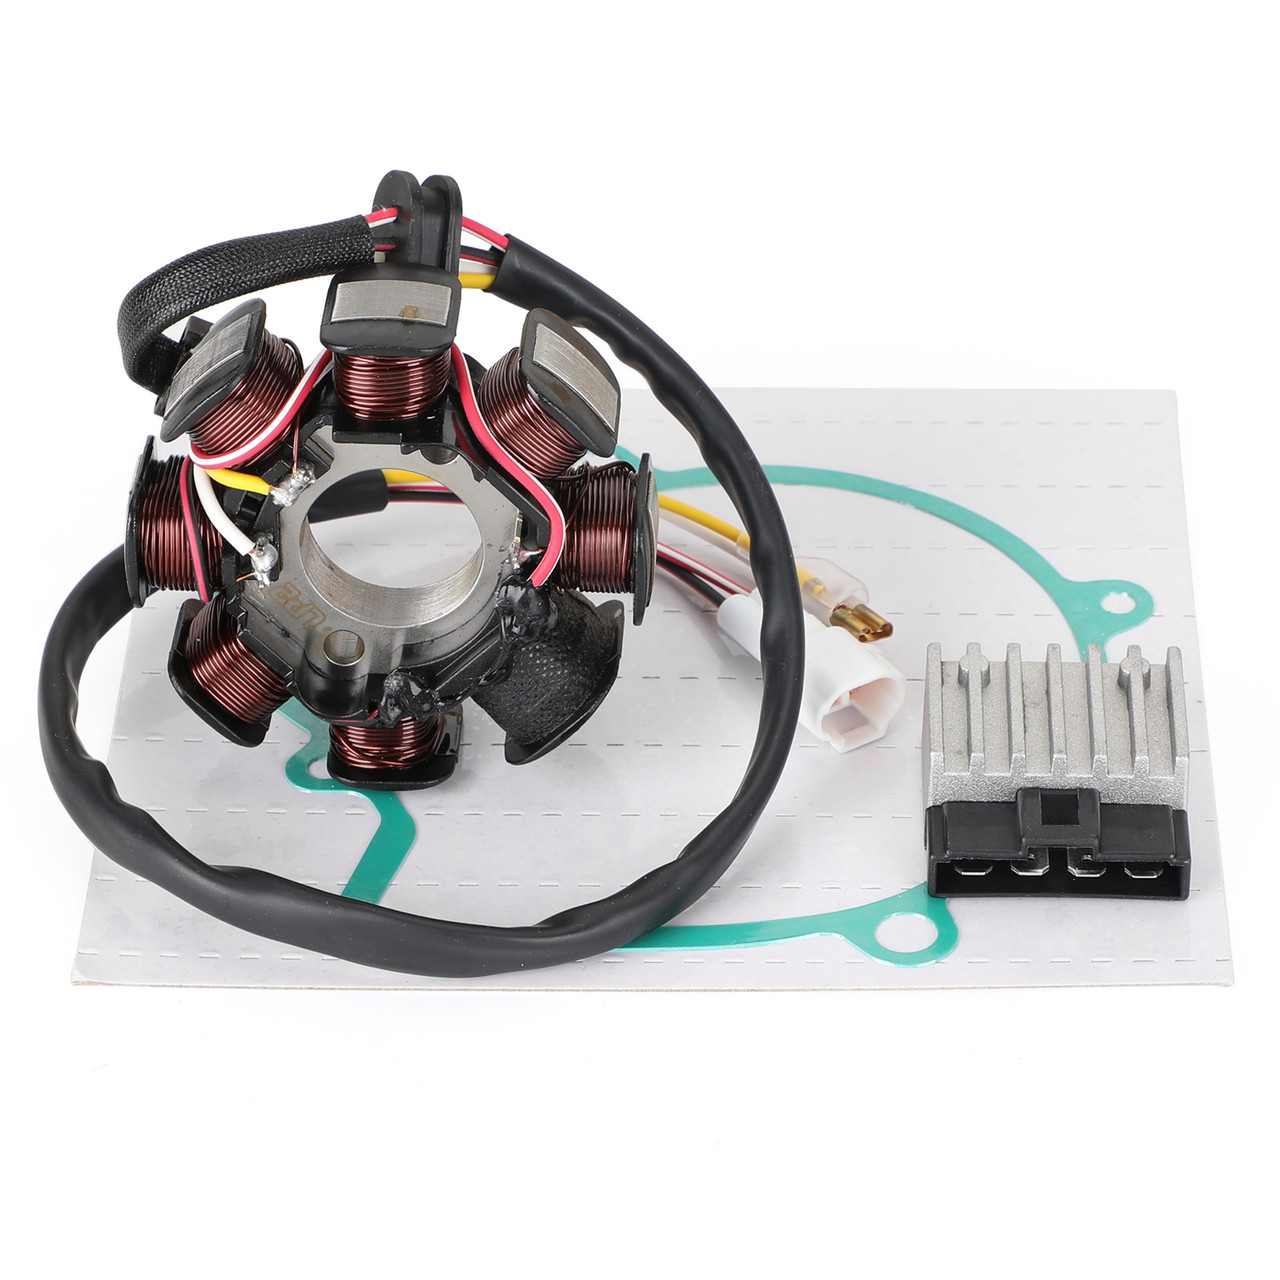 Magneto Coil Stator + Voltage Regulator + Gasket Assy Fit for 250 EXC-F Racing 02-03 450 EXC-G Racing 525 MXC Racing 03-04